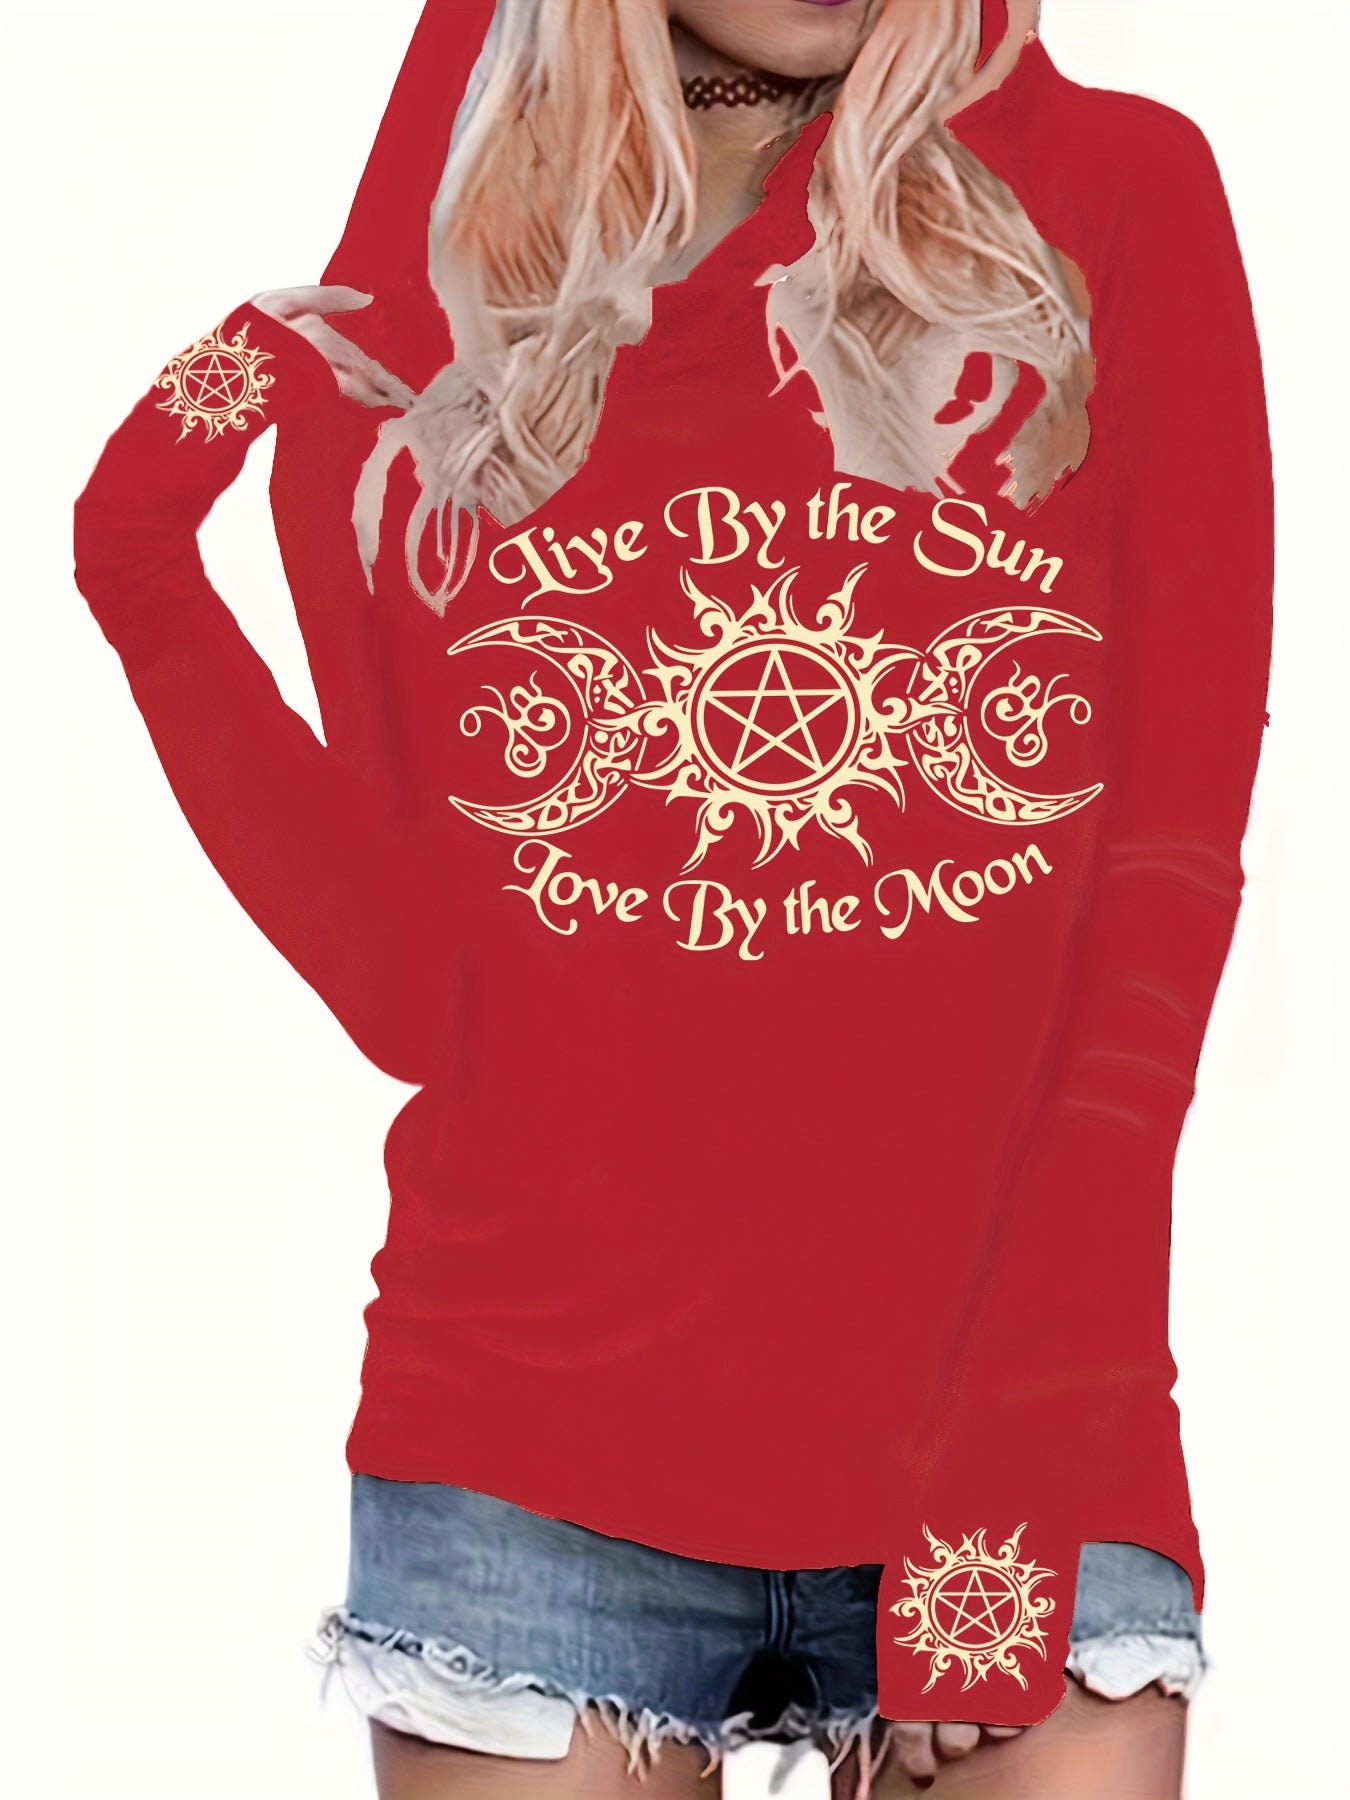 A person wearing a red Maramalive™ Gothic Graphic Print Hooded T-shirt with a design that reads "Live By the Sun, Love By the Moon" and a decorative design on it. The hooded T-shirt is paired with denim shorts, offering a casual fit perfect for everyday wear. It's also machine washable for easy care.